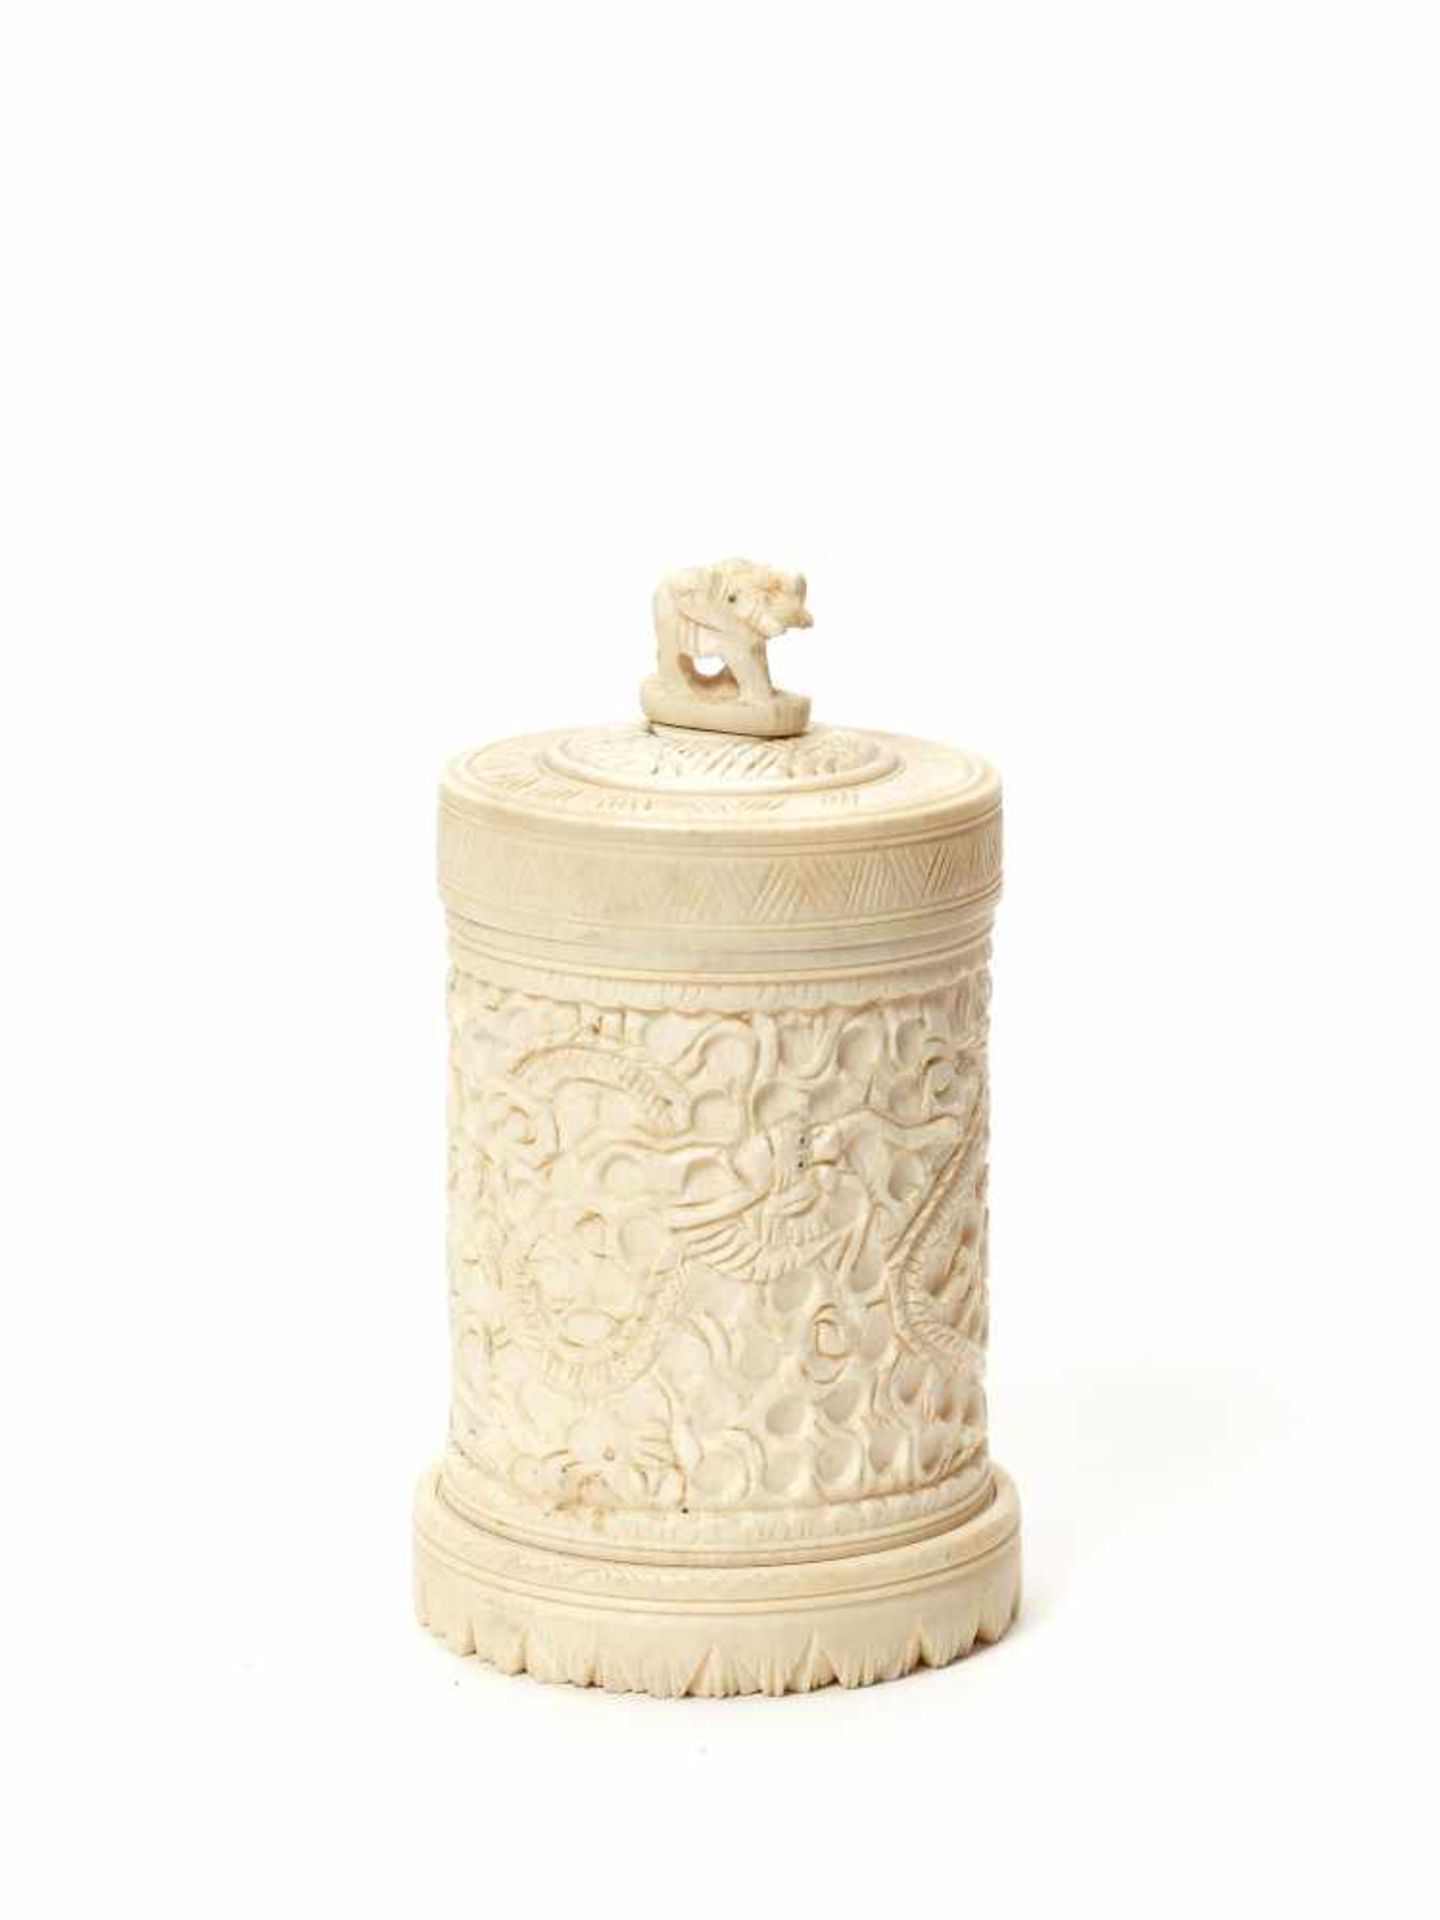 AN INDIAN IVORY BOX AND COVER, C. 1880IvoryIndia, c. 1880This Indian ivory box and cover features